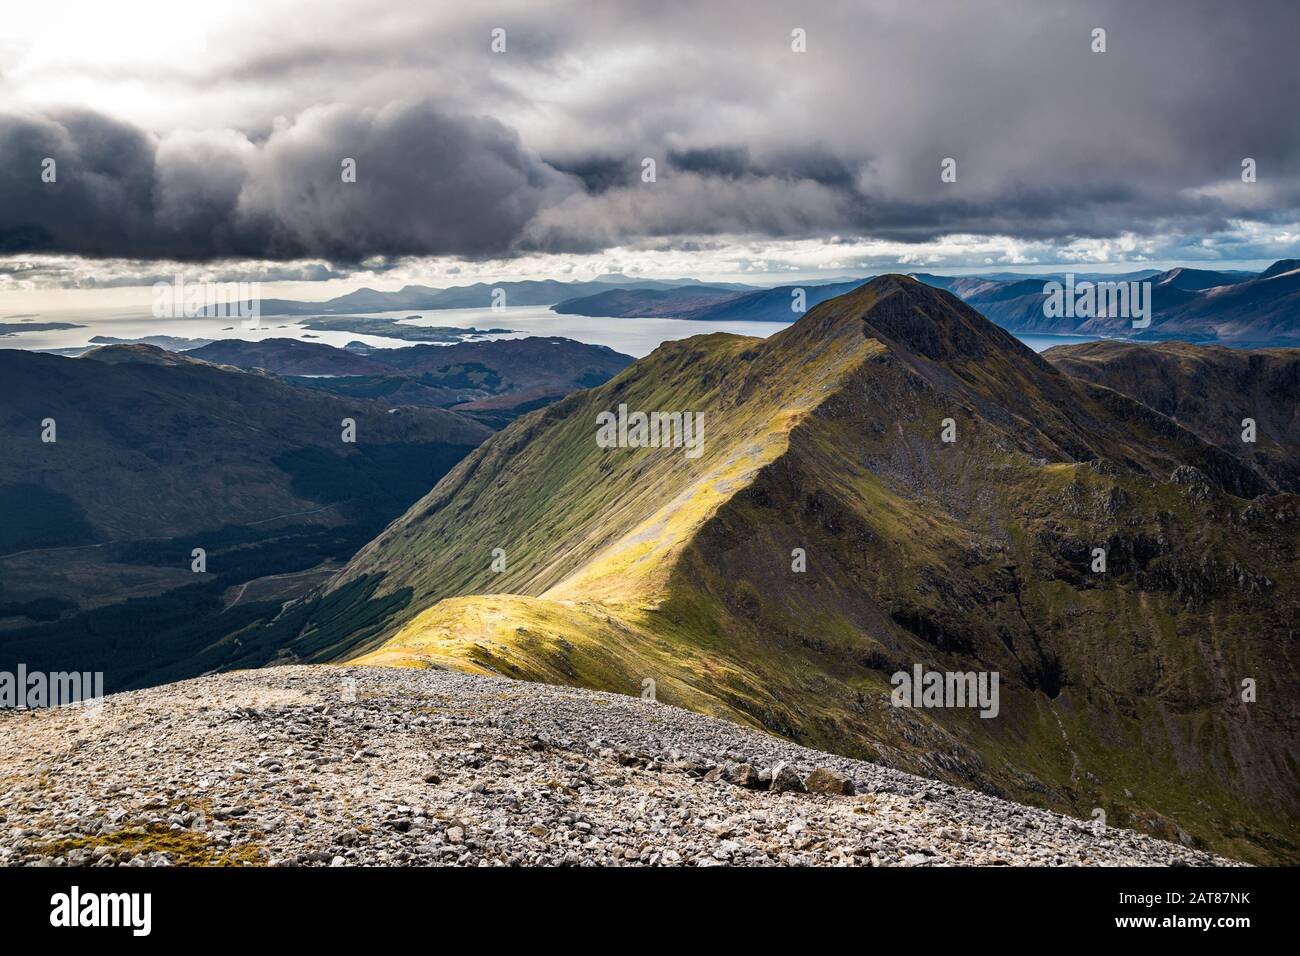 The peak of Sgorr Dhonuill (Beinn a'Bheithir) on an autumn day with clouds gathering ofer the coastline. Glencoe, Scotland. Stock Photo